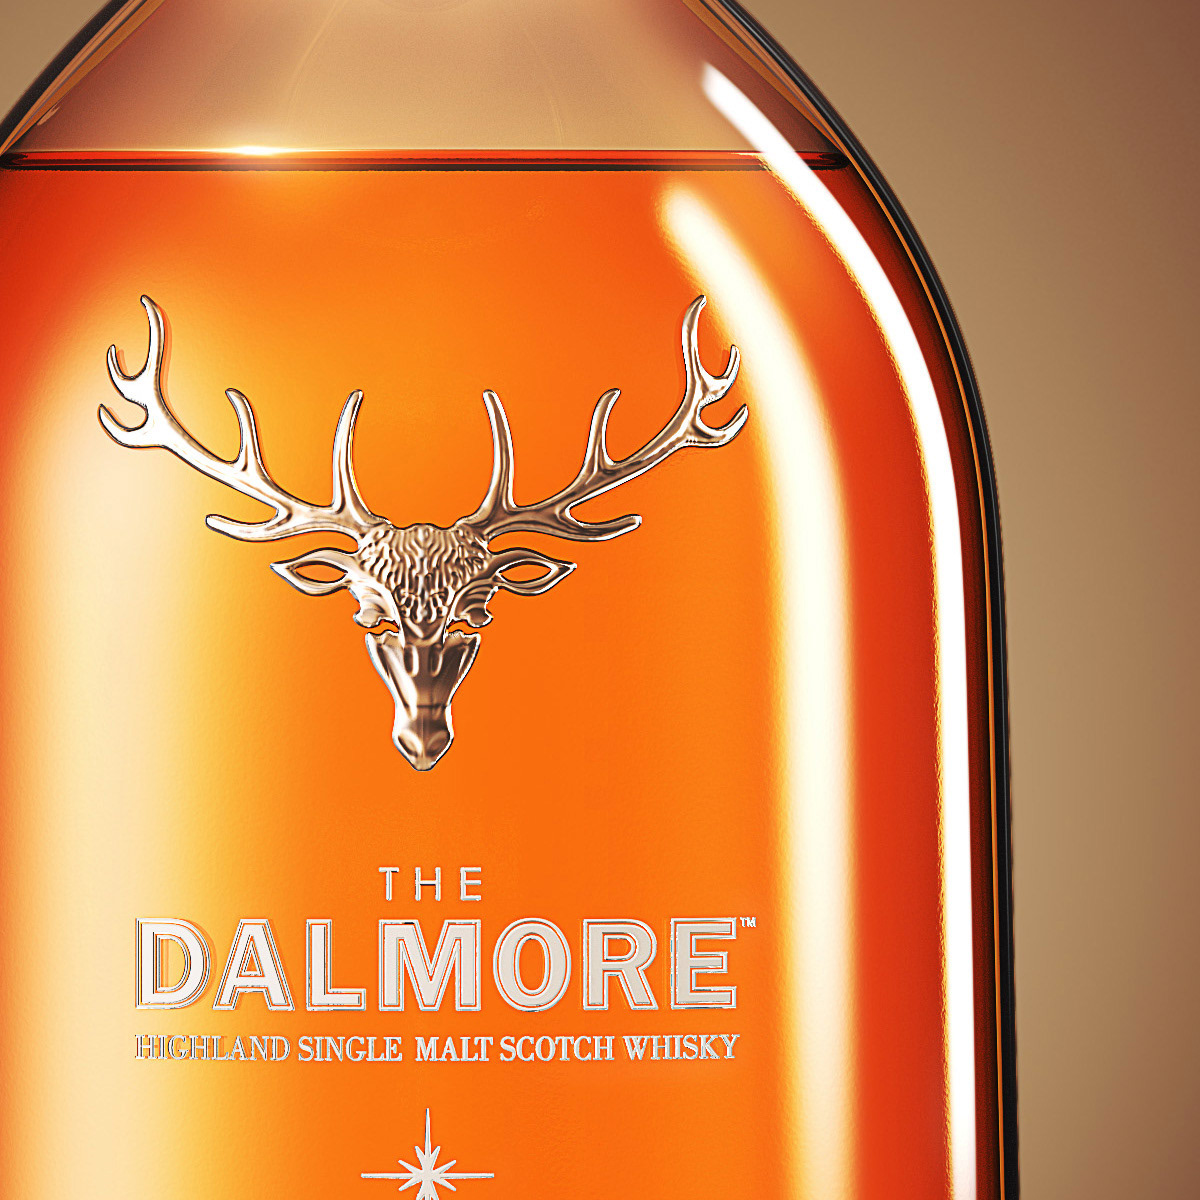 Advertising  dalmorewhisky Whisky thedalmore packagedesign productdesign branding  3dart photorealistic bottle